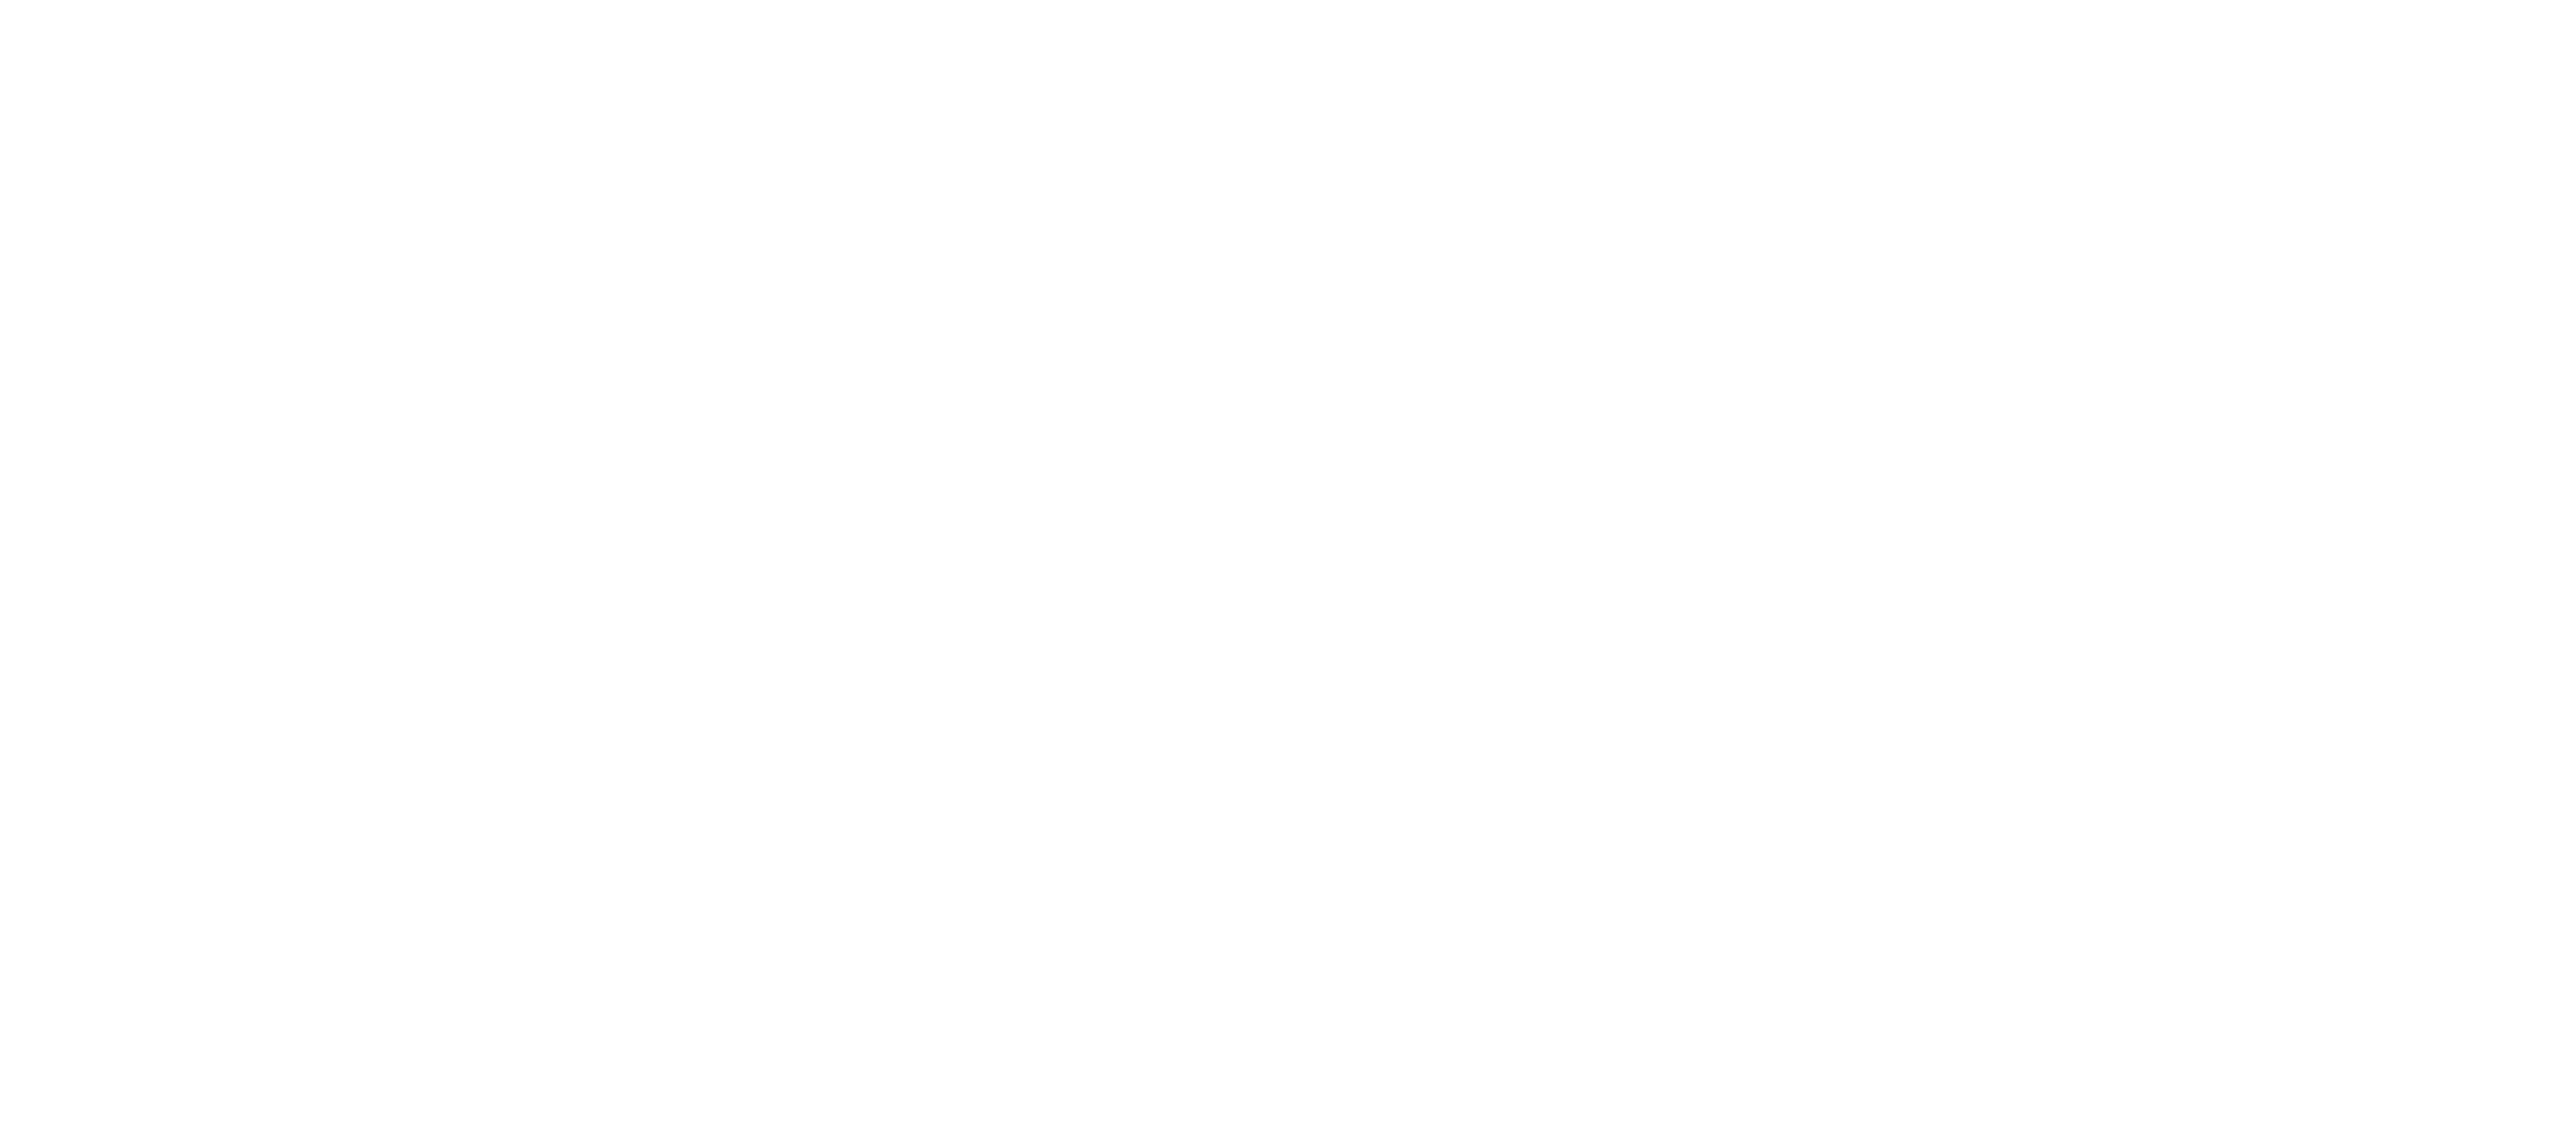 Merry Christmas PNG Clip Art Image.